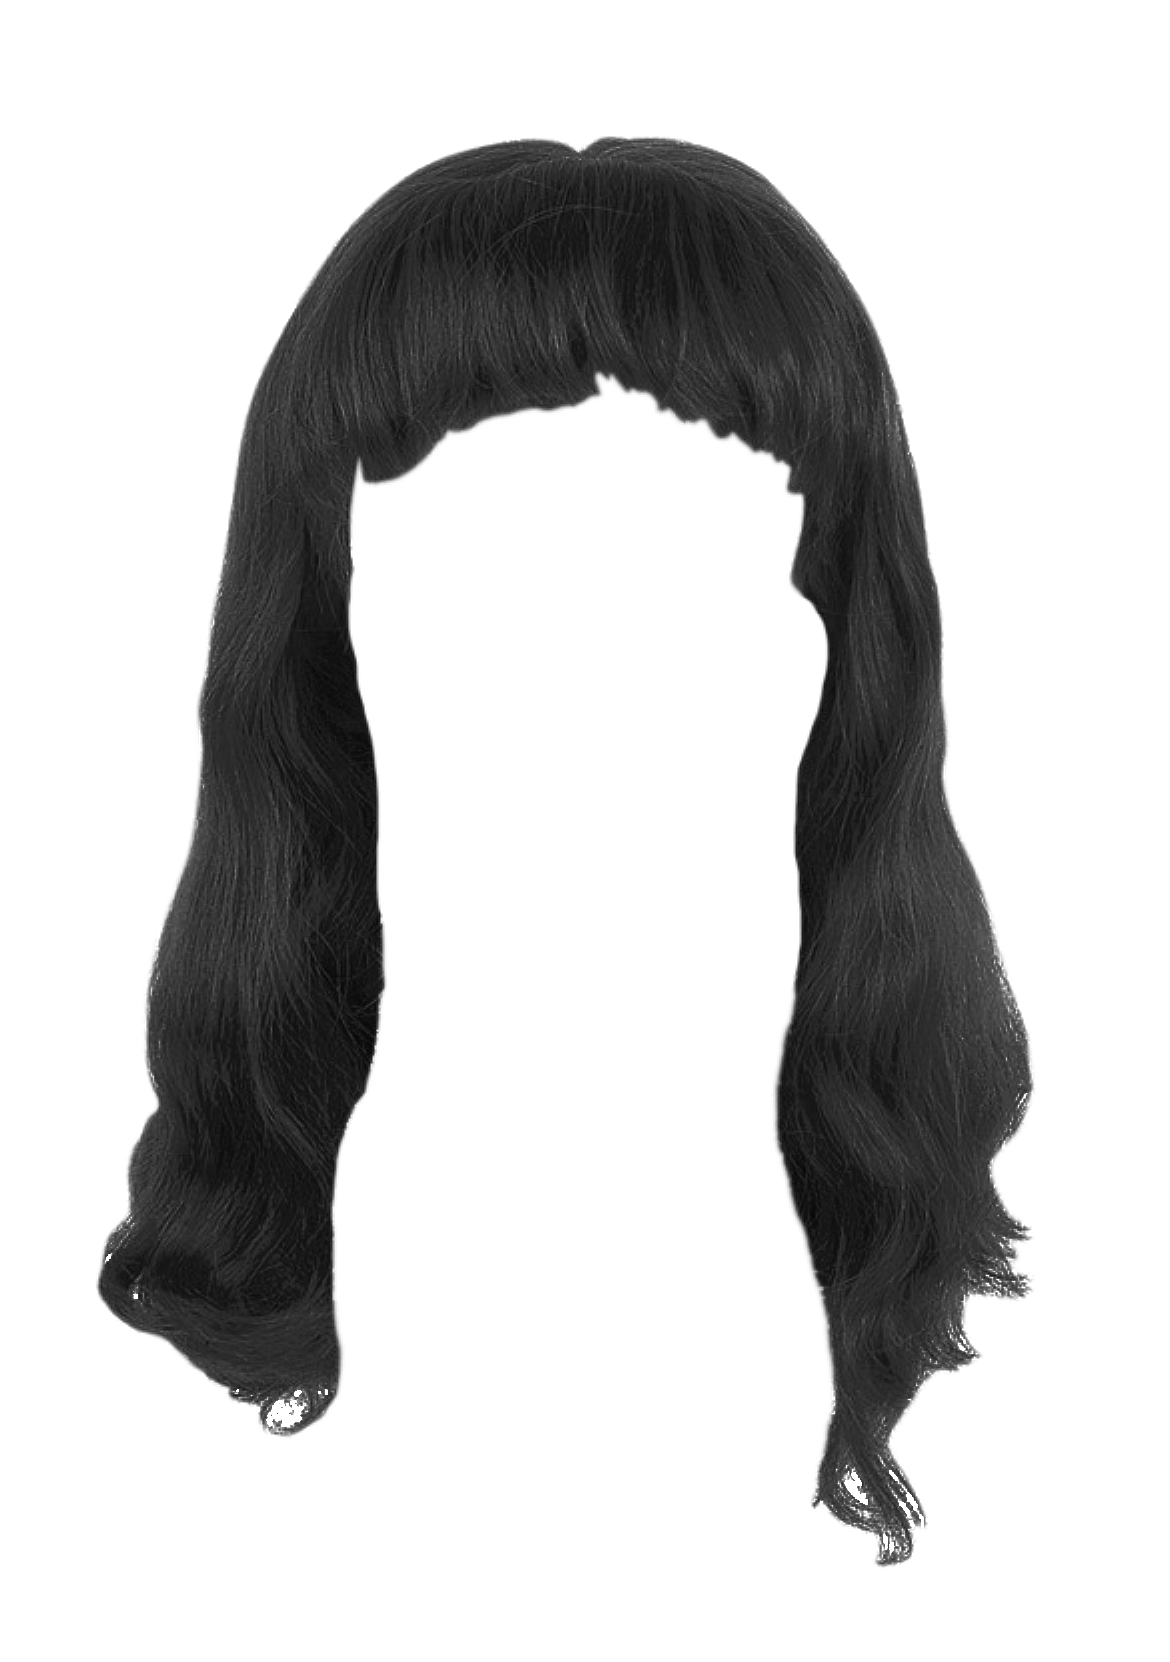 Anime Hair PNG File